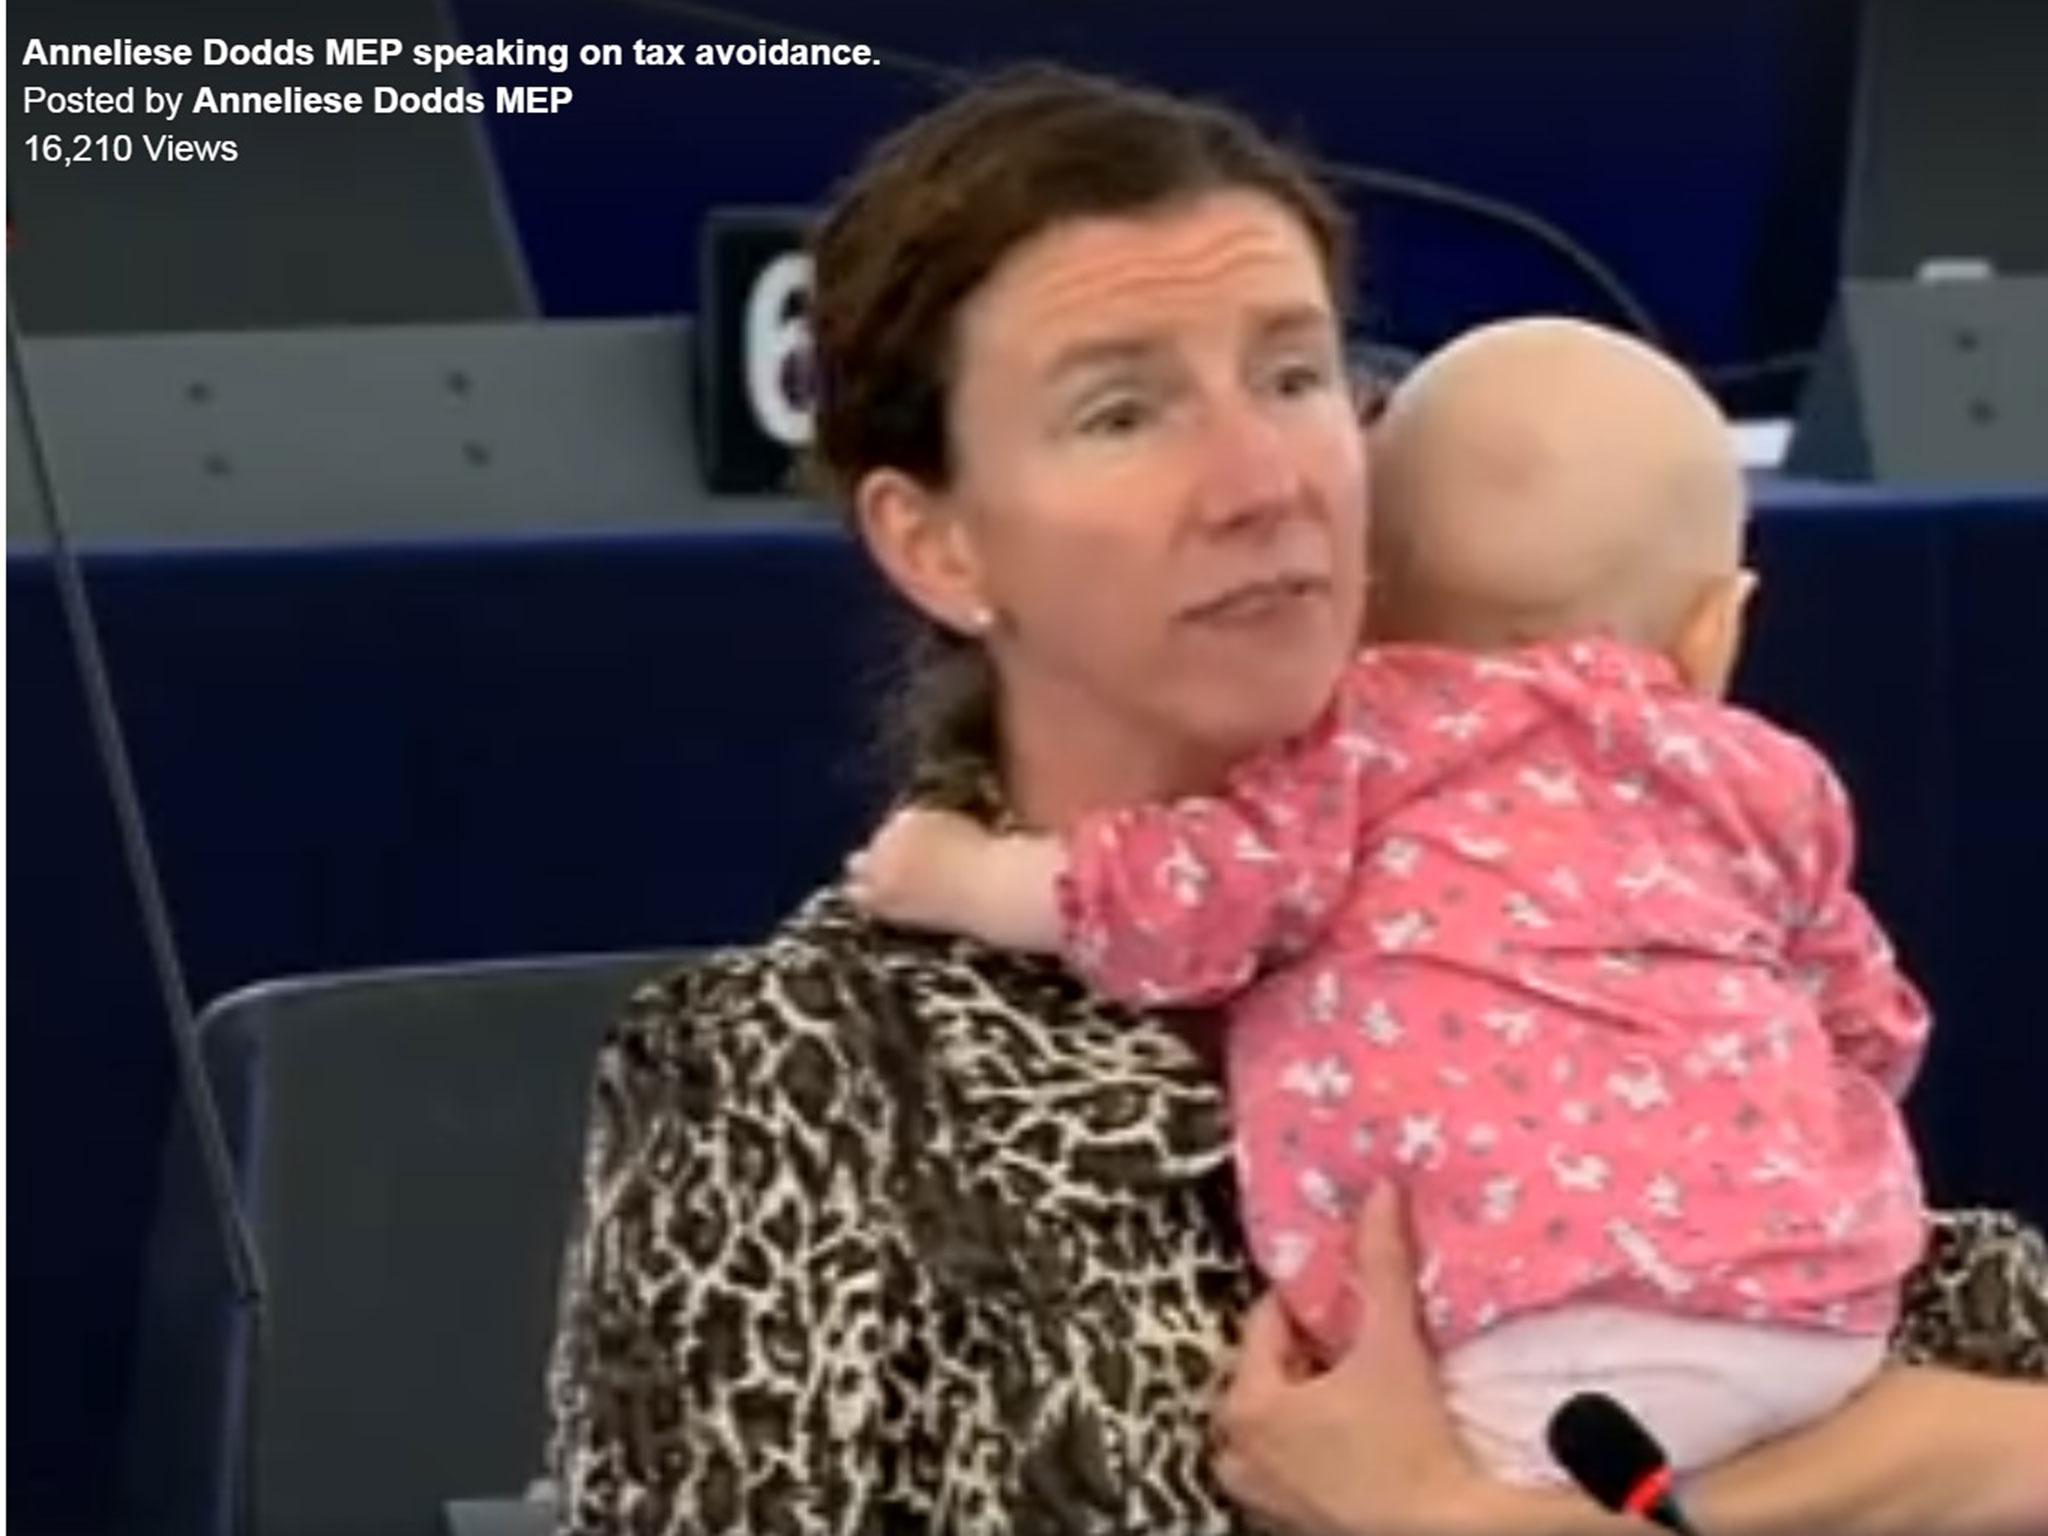 MEP Anneliese Dodds spoke on tackling tax avoidance and evasion in the EU